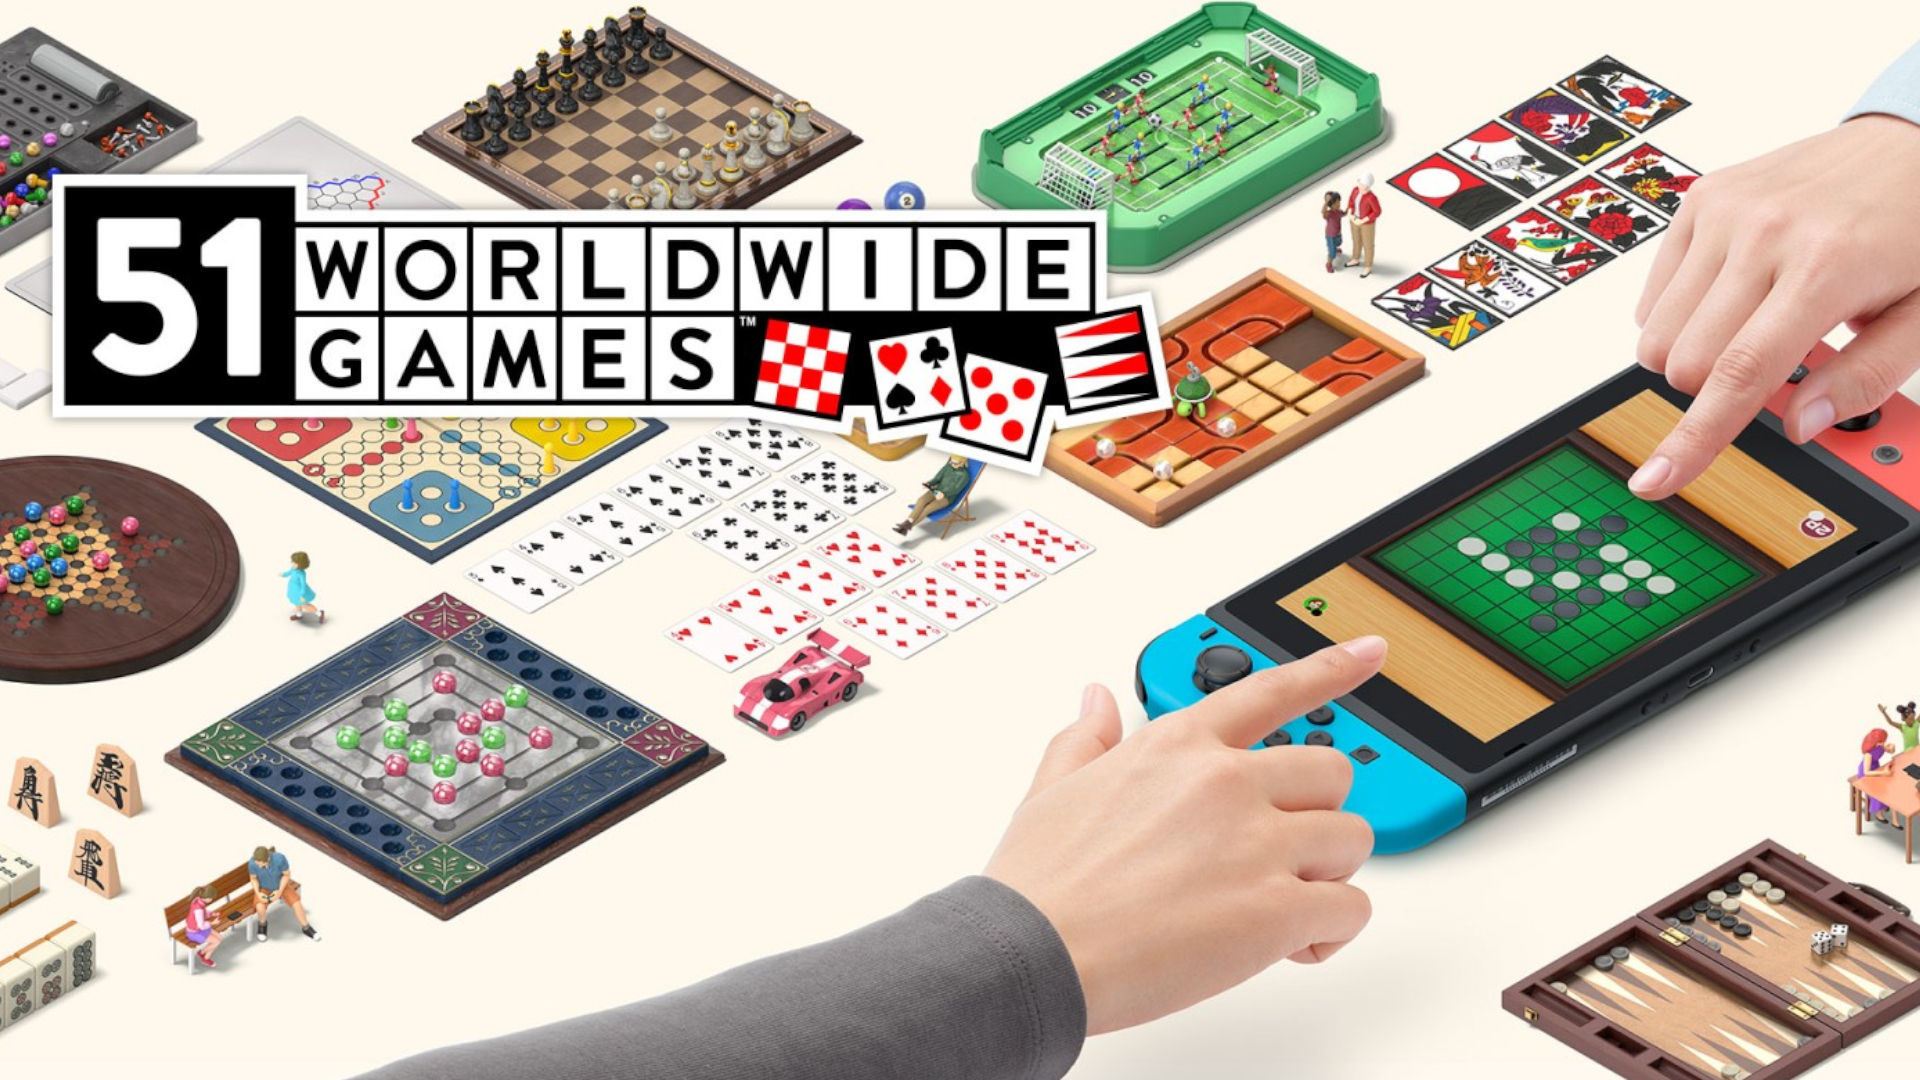 Cover art for 51 Worldwide Games, which includes two poker games in its collection